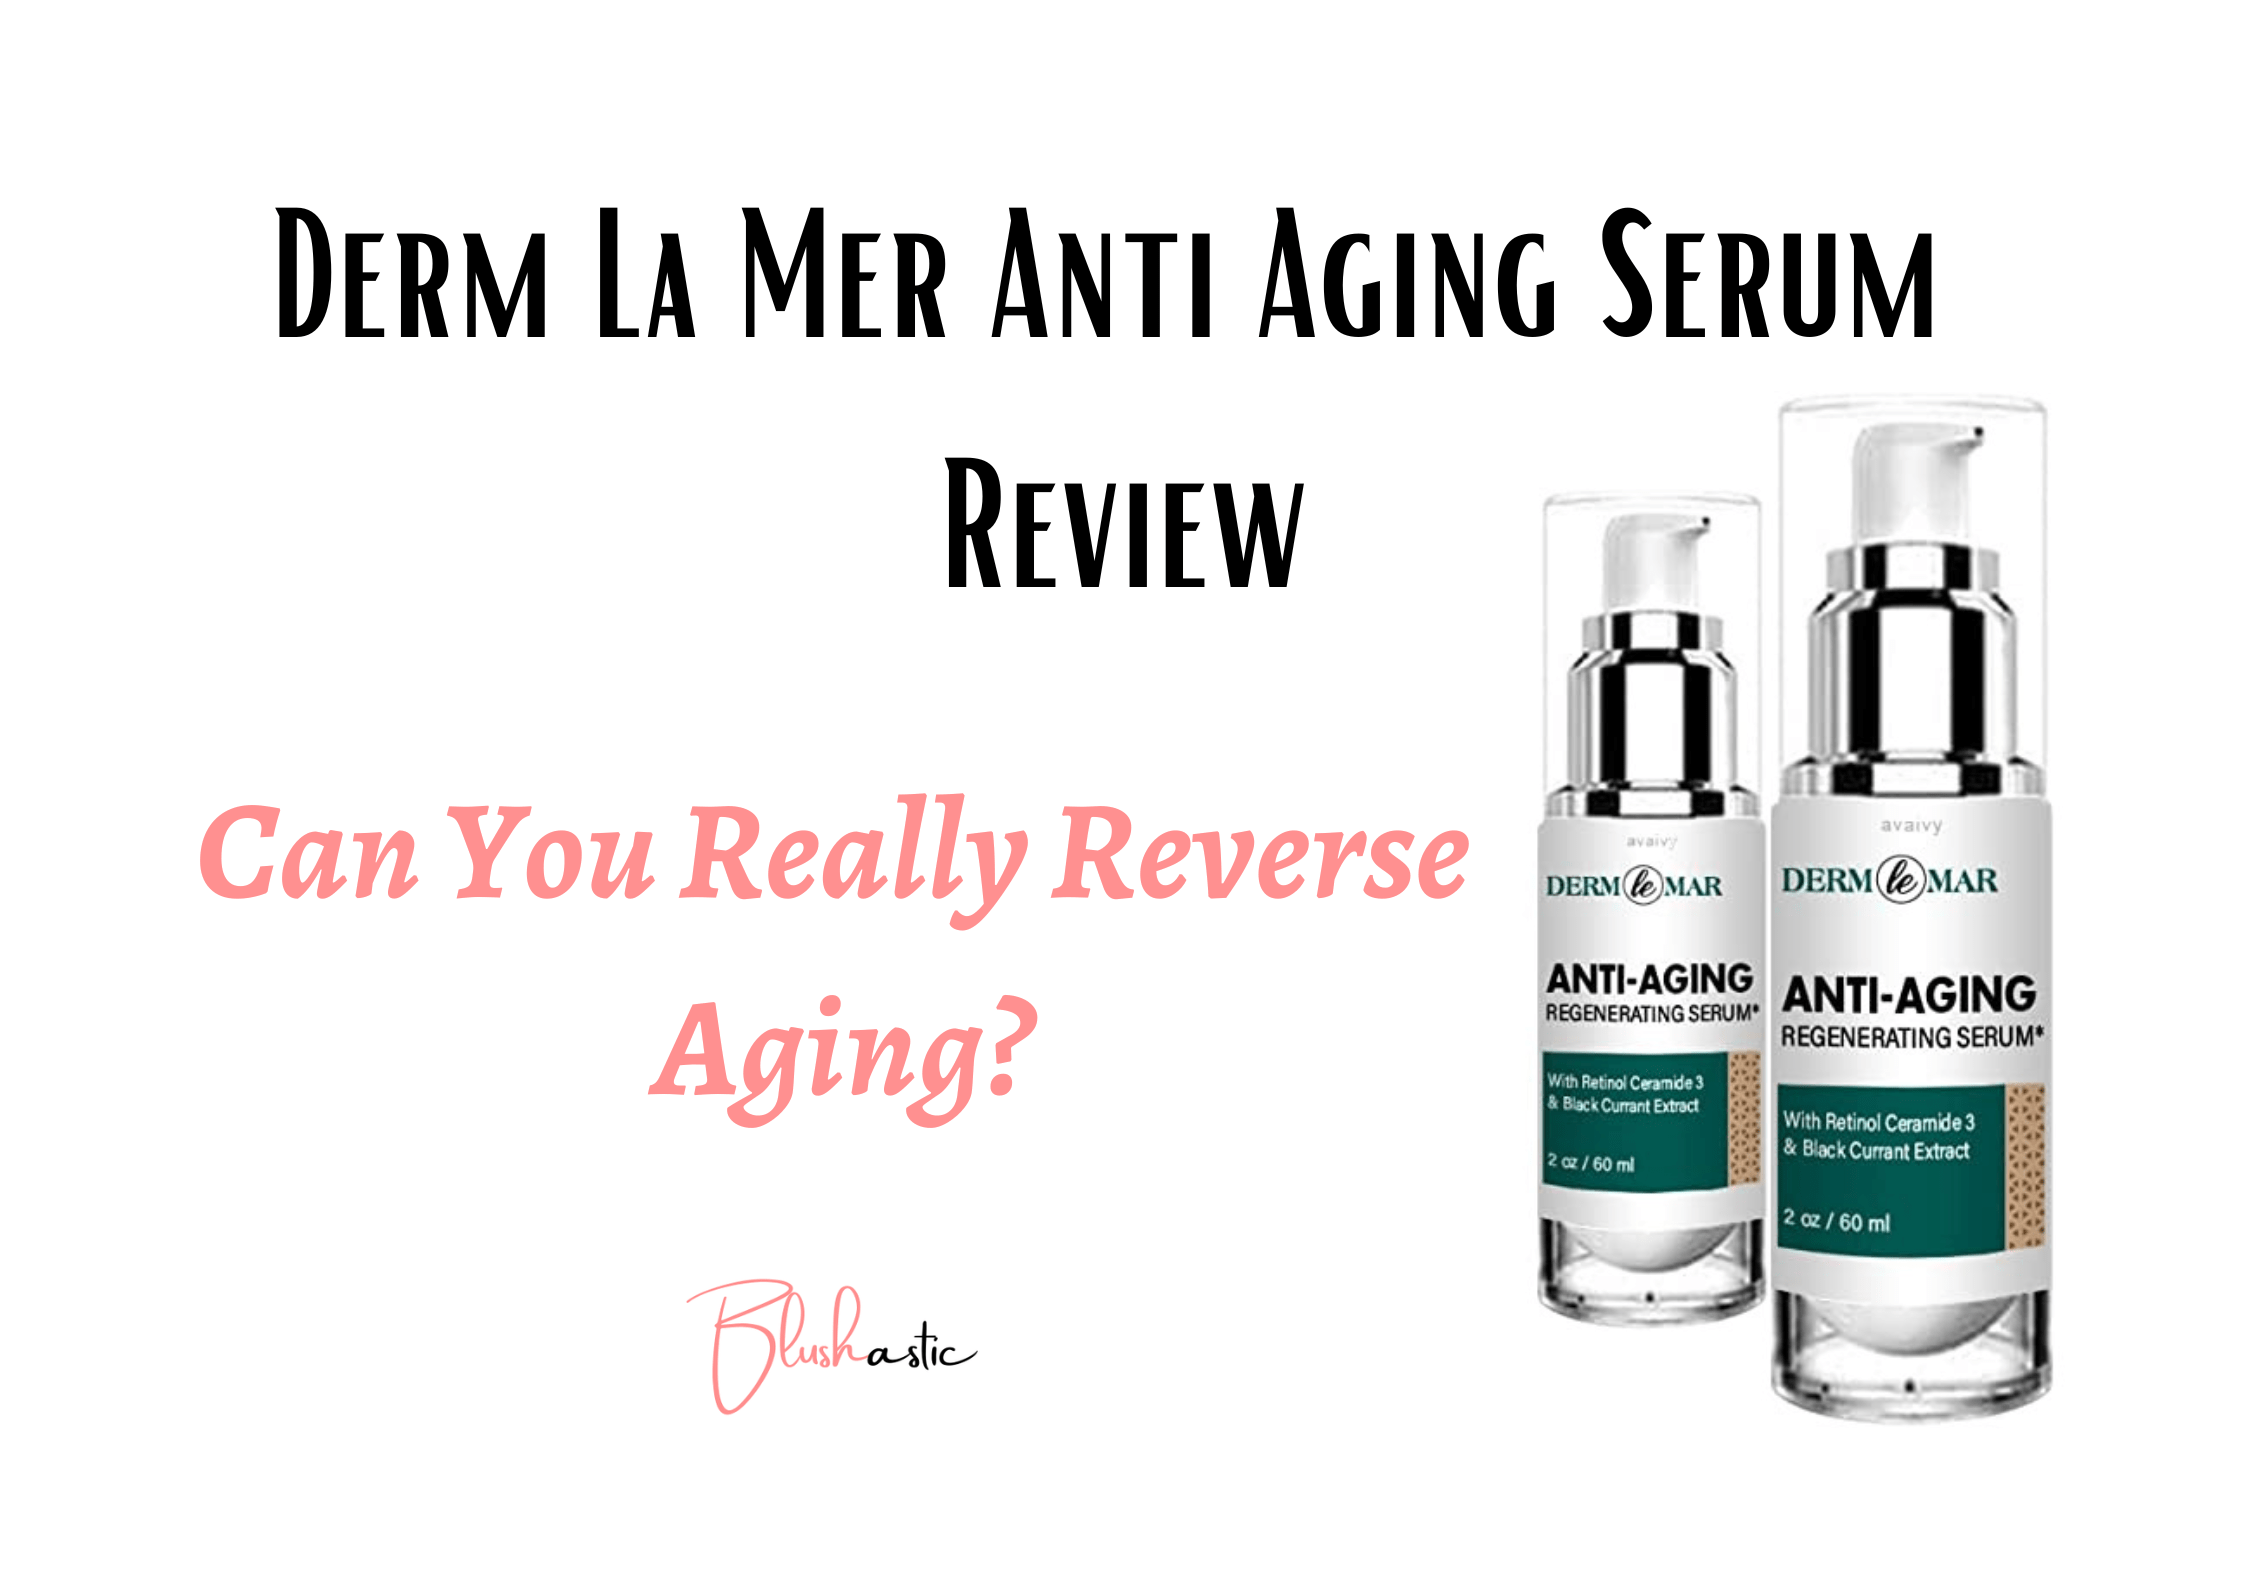 Derm La Mer Anti Aging Serum Reviews | Can You Really Reverse Aging? -  Blushastic